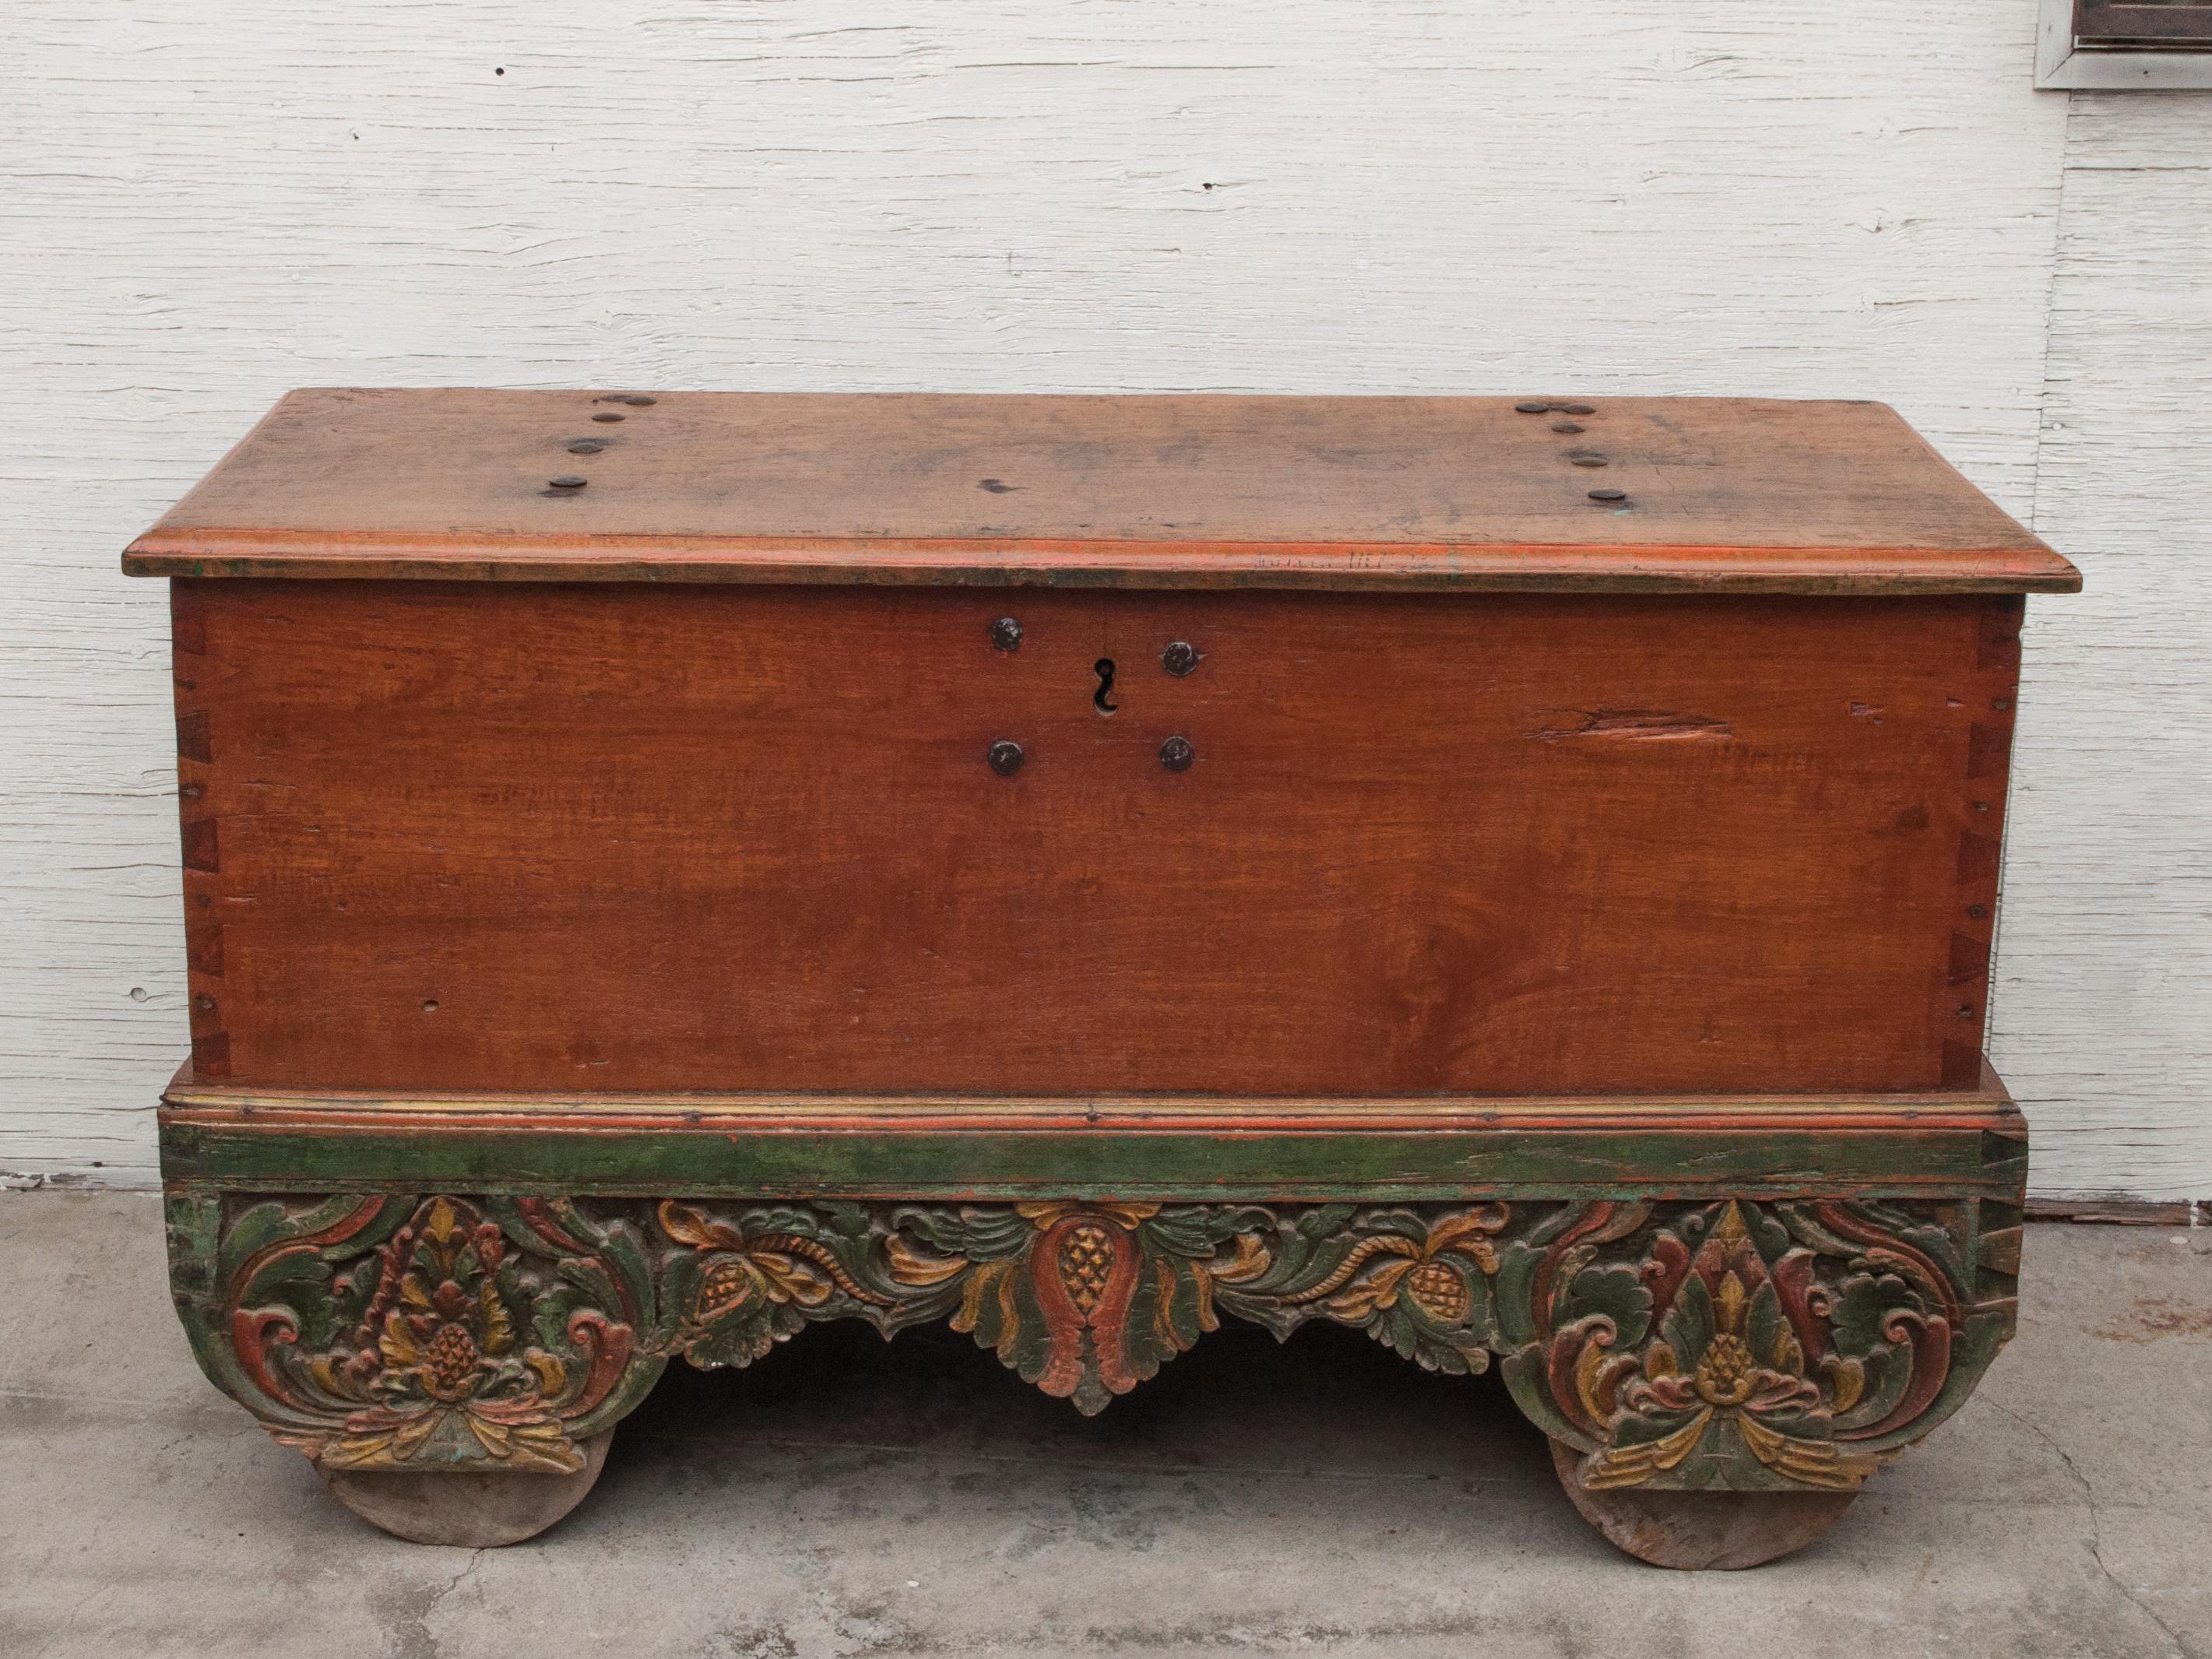 Mid-20th century teak chest on wheels from Java. Original color and hardware. Measures: 56